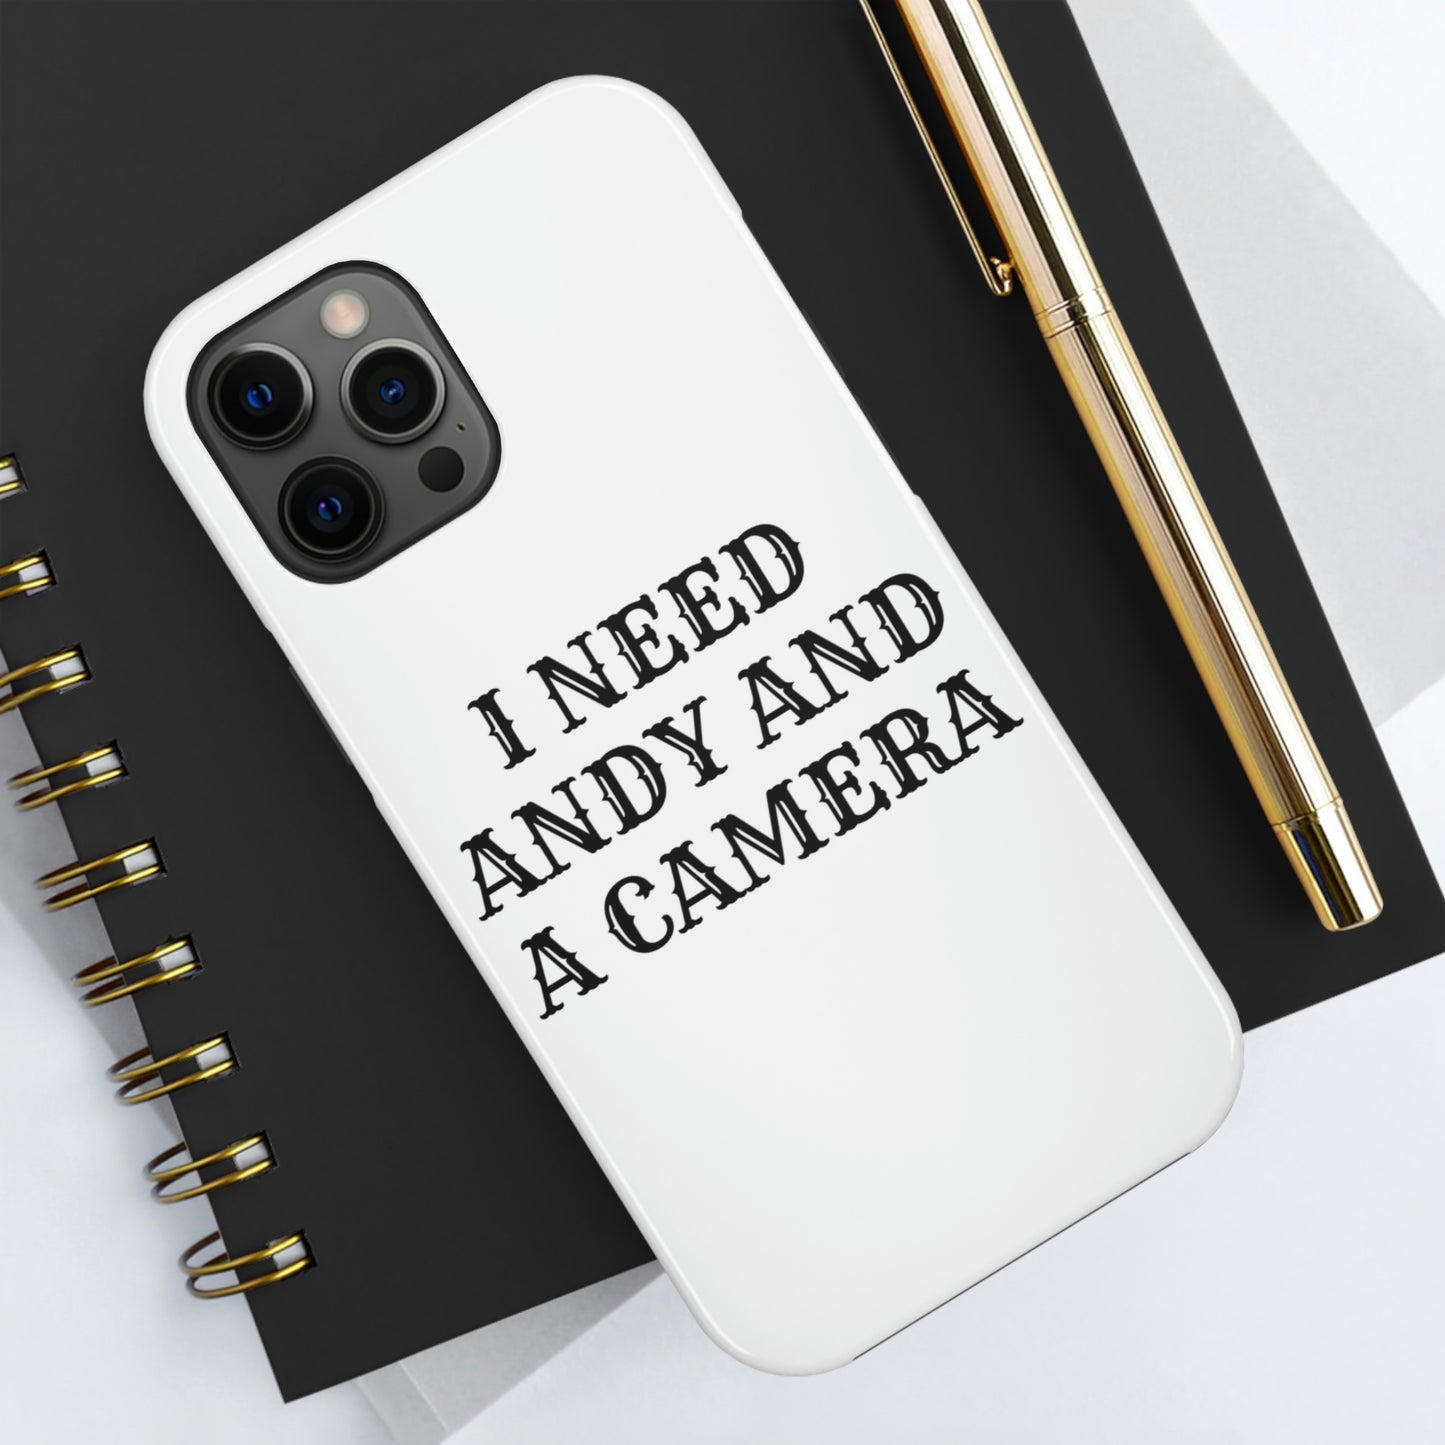 I Need Andy and a Camera iphone Cases